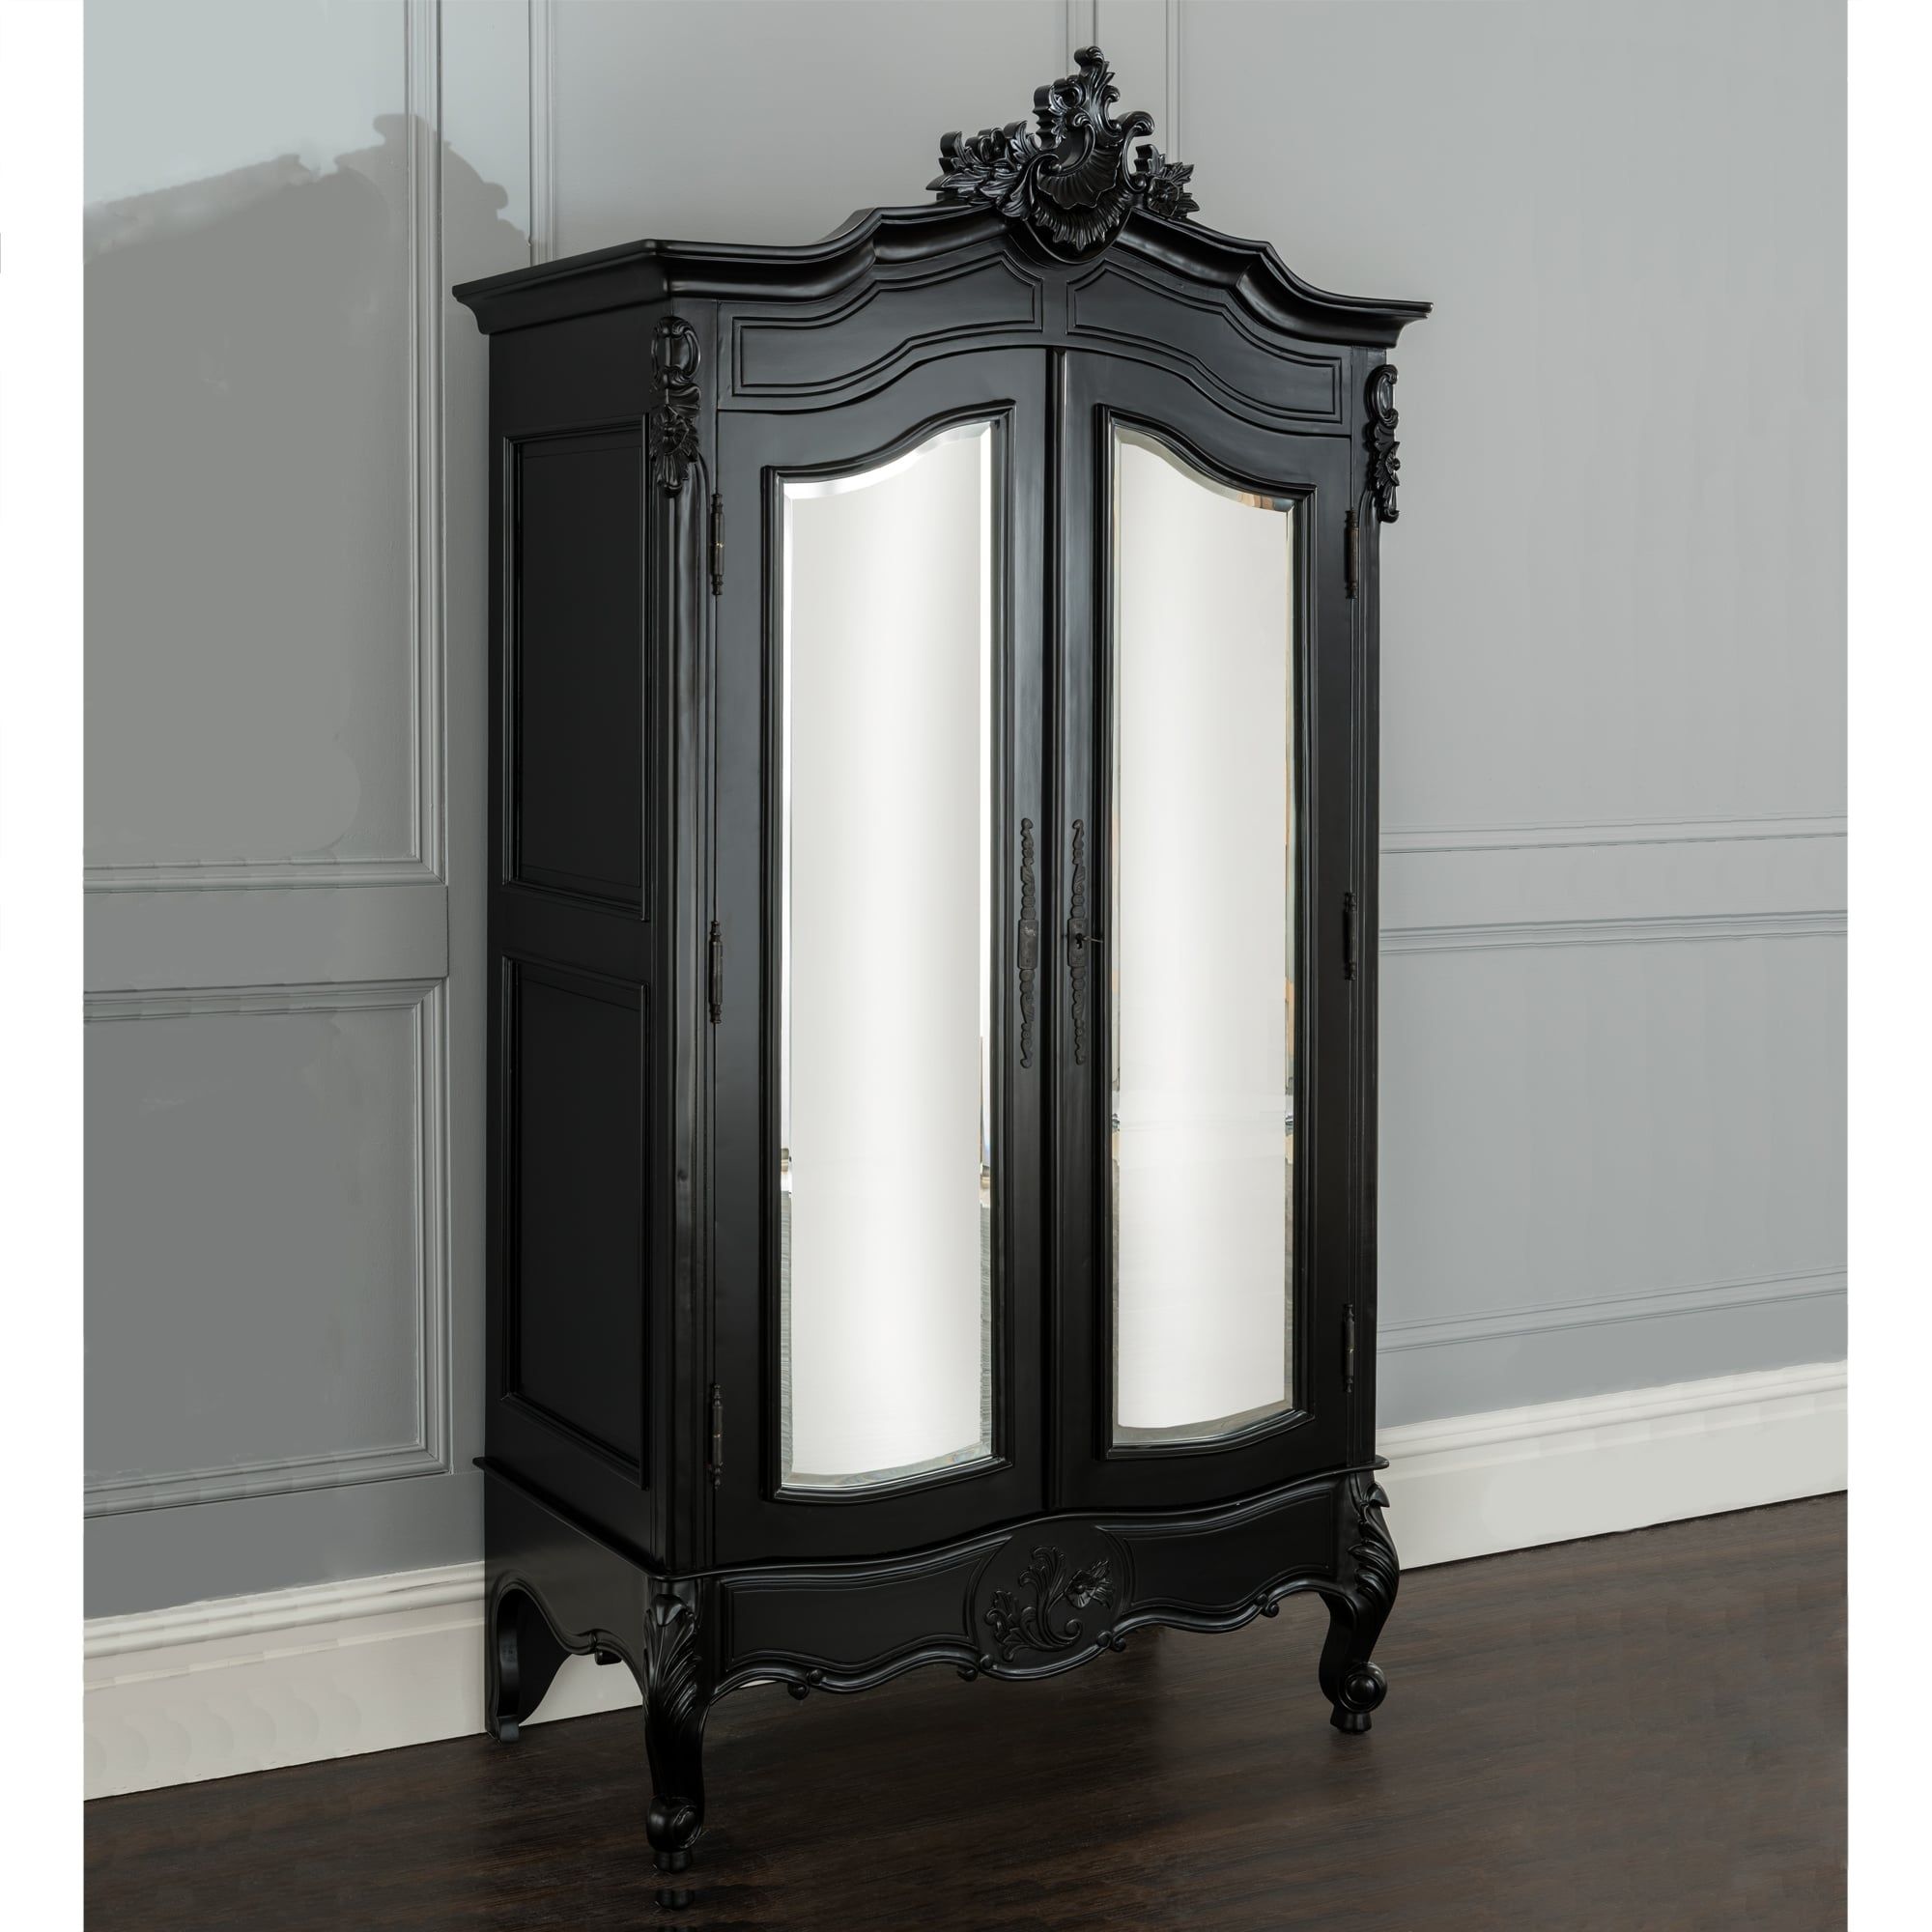 La Rochelle Antique French Wardrobe | Black Furniture Collection In Black French Wardrobes (View 4 of 15)